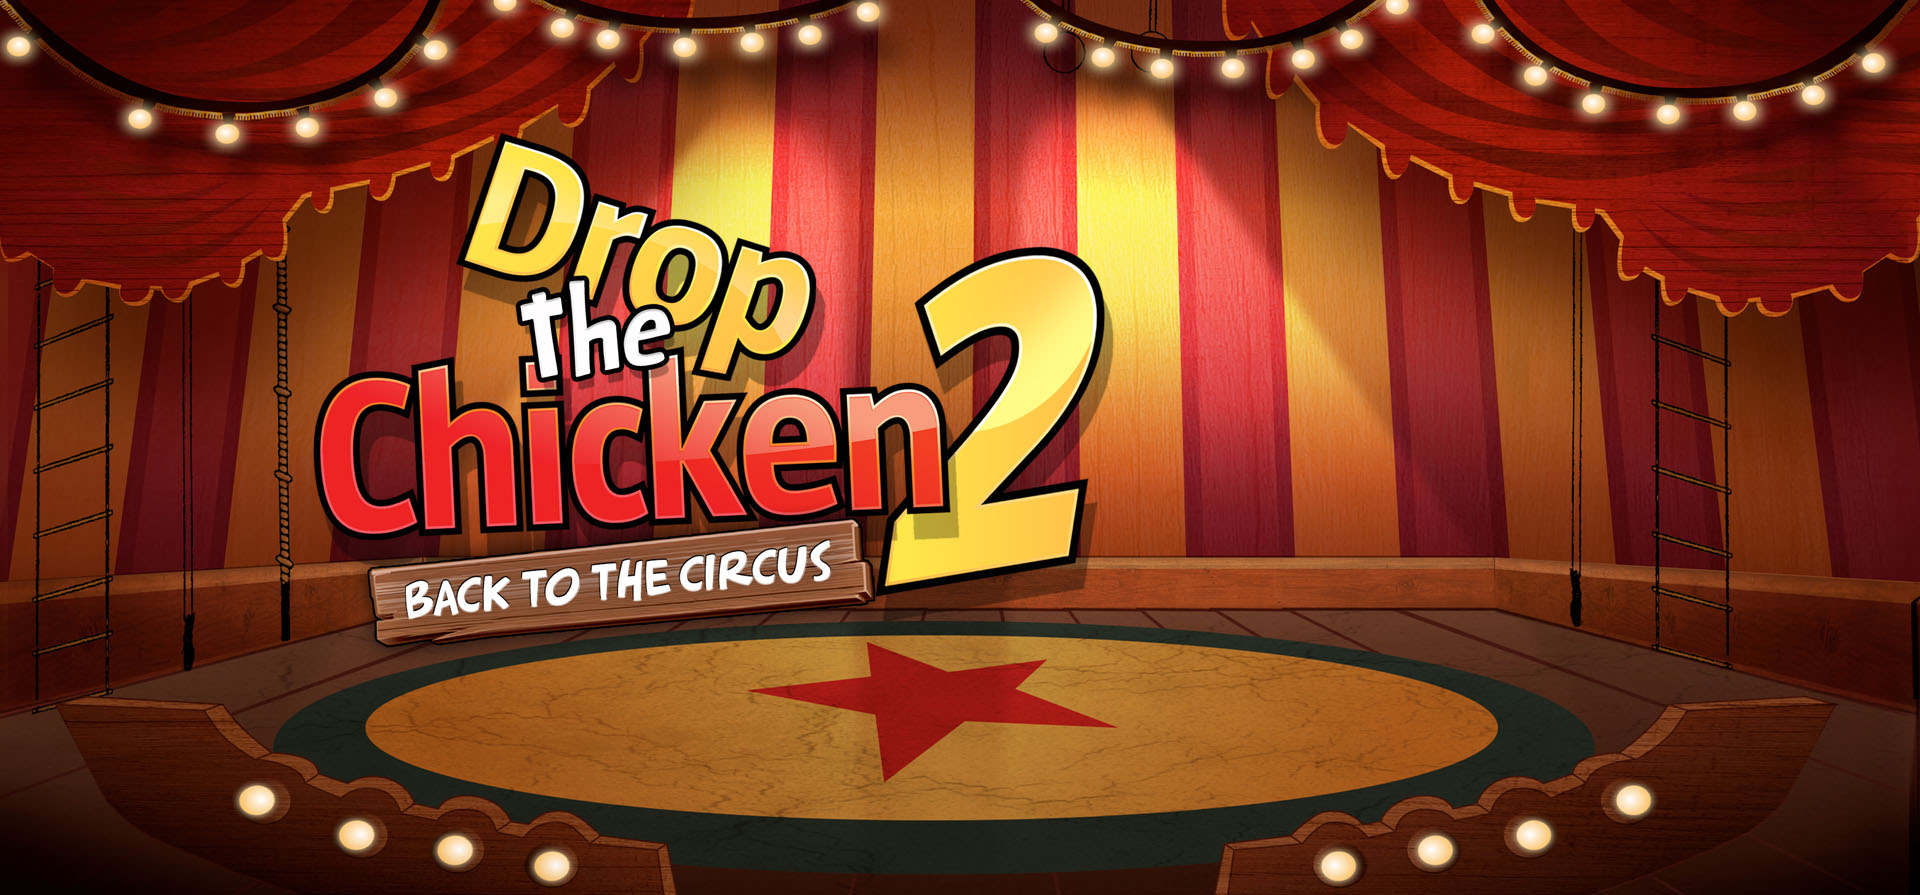 Drop The Chicken 2 - Back to the Circus